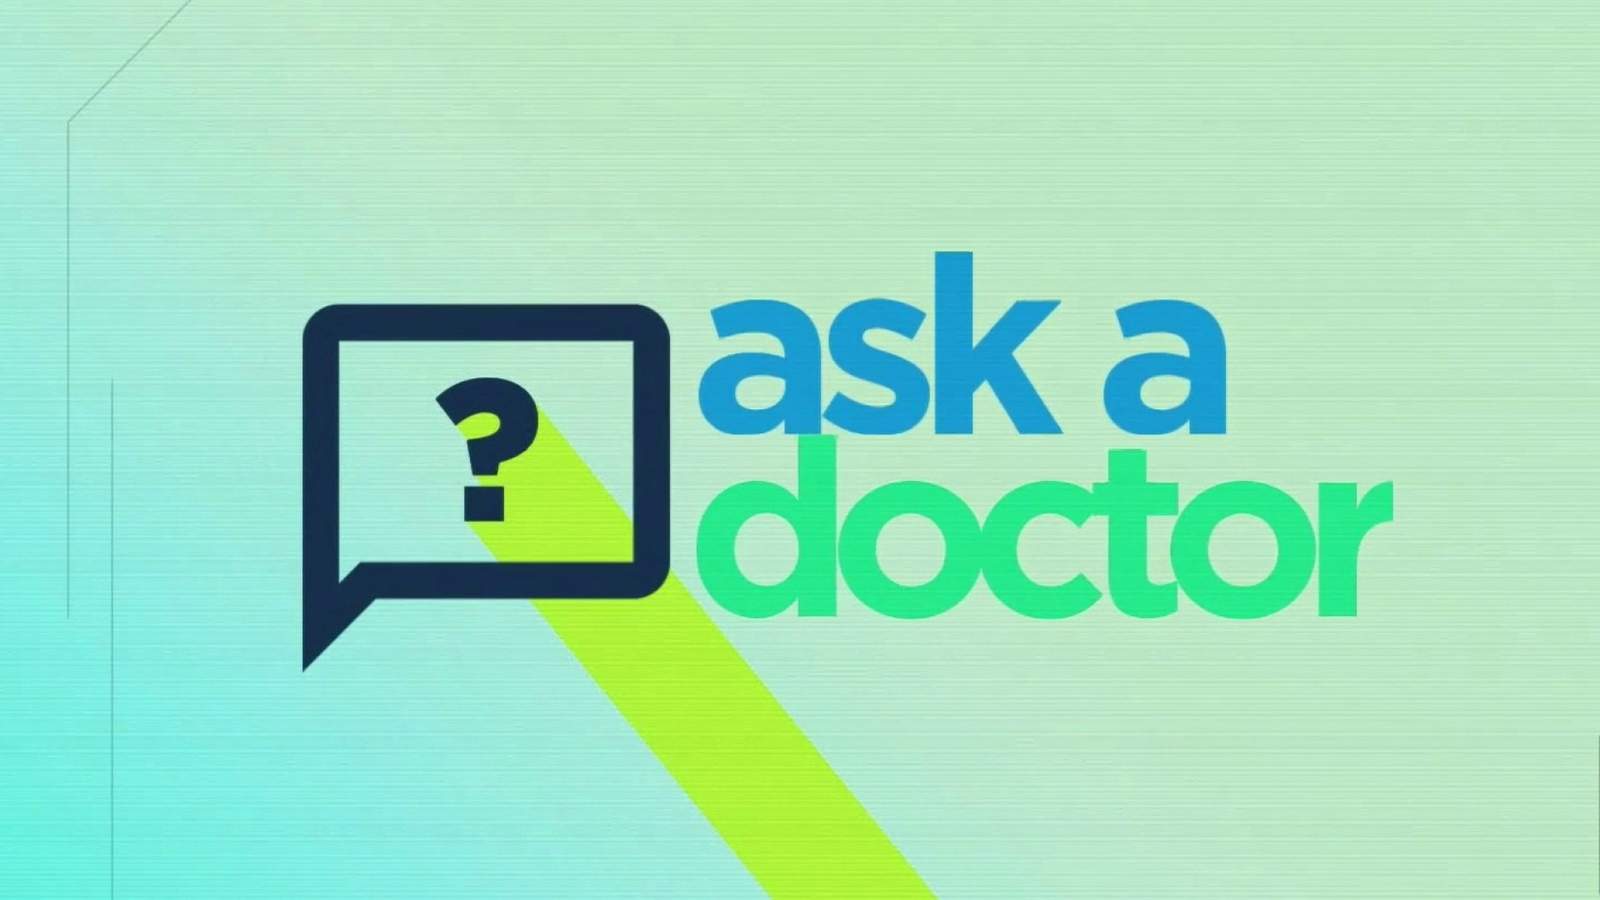 Ask a doctor: Mental health counselor sees increase in patients during pandemic